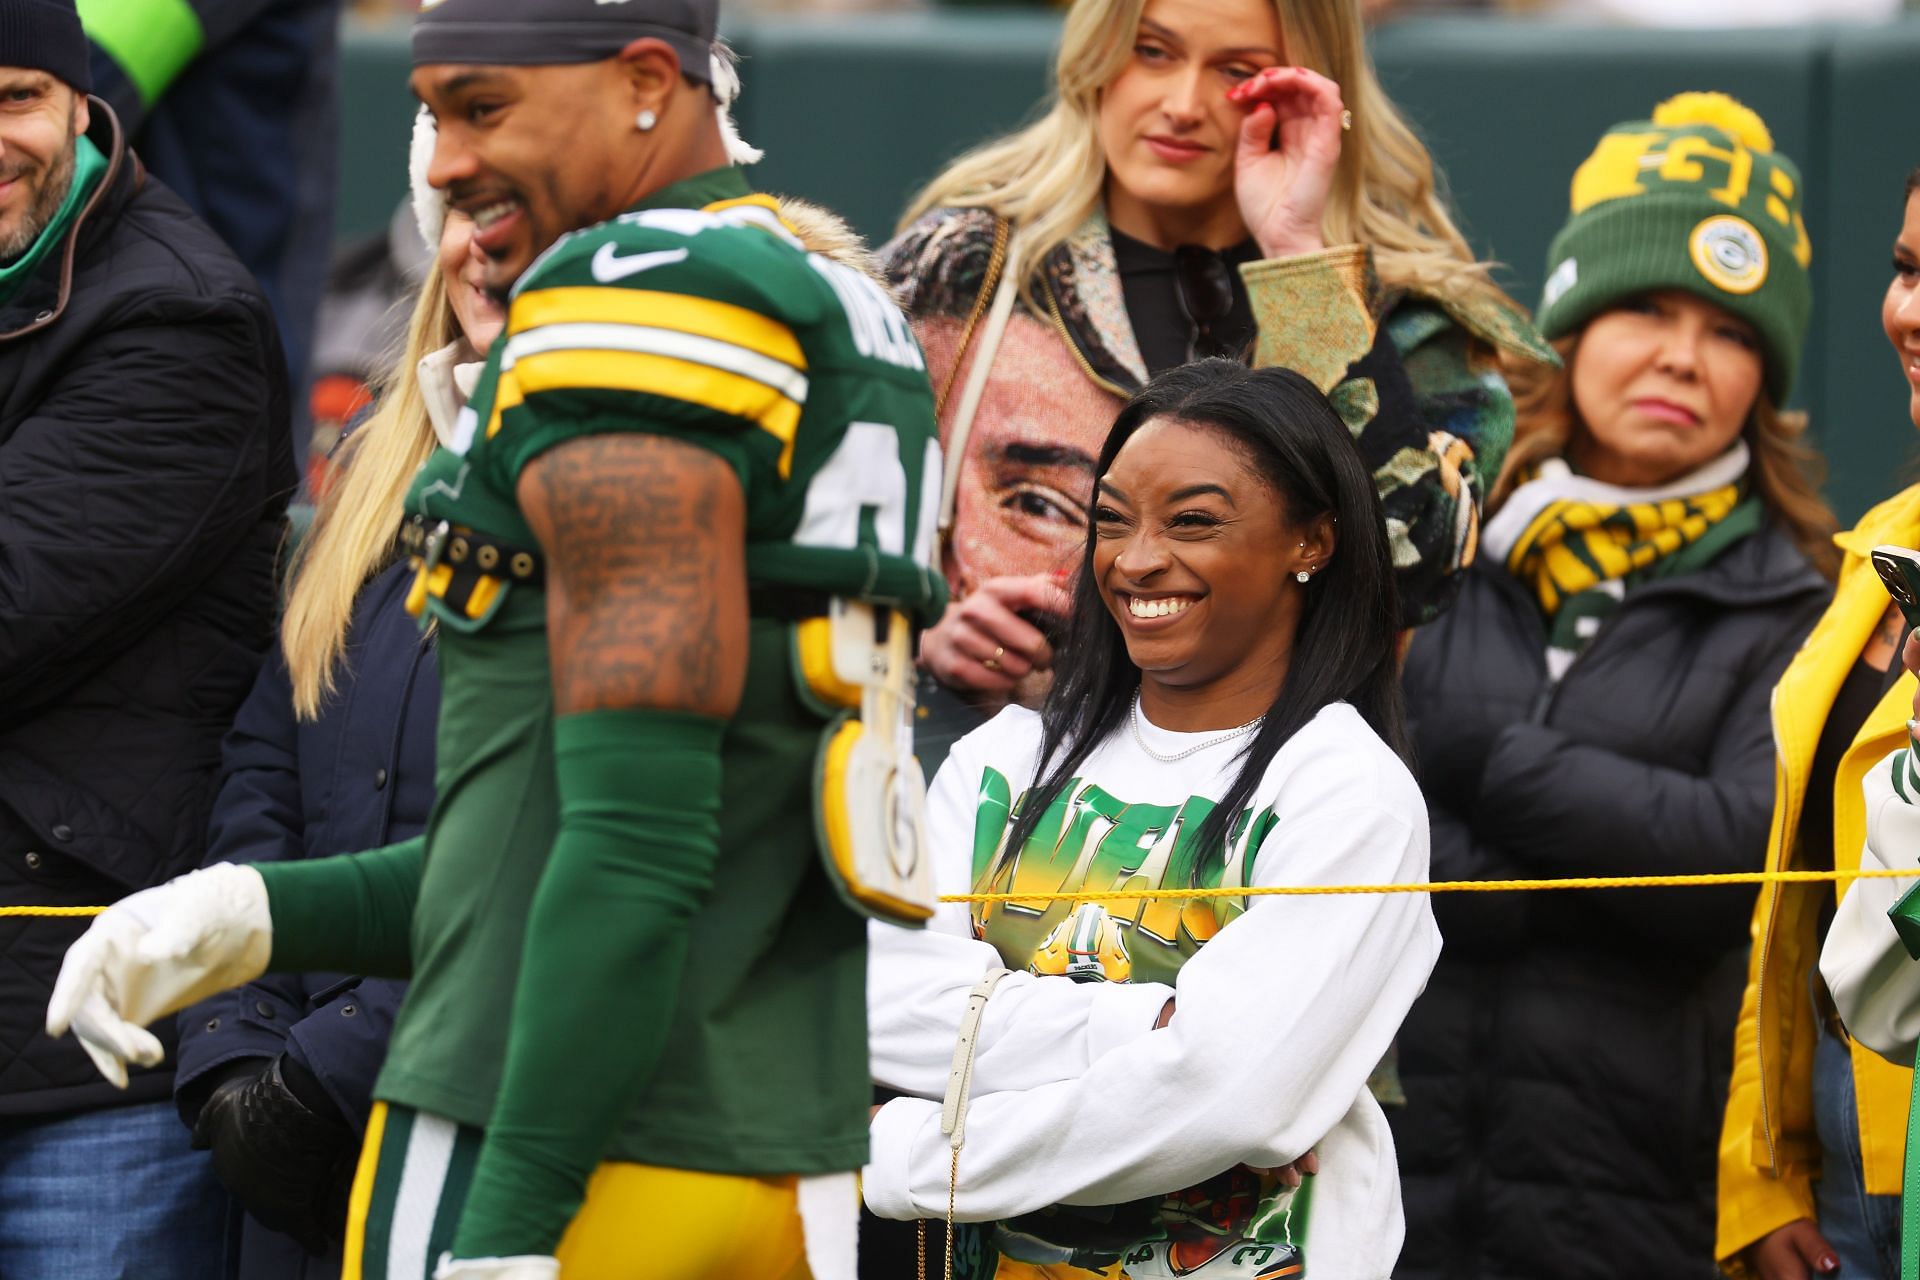 Simone Biles looks at her husband Jonathan Owens before a game between the Minnesota Vikings and the Green Bay Packers at Lambeau Field in Green Bay, Wisconsin.